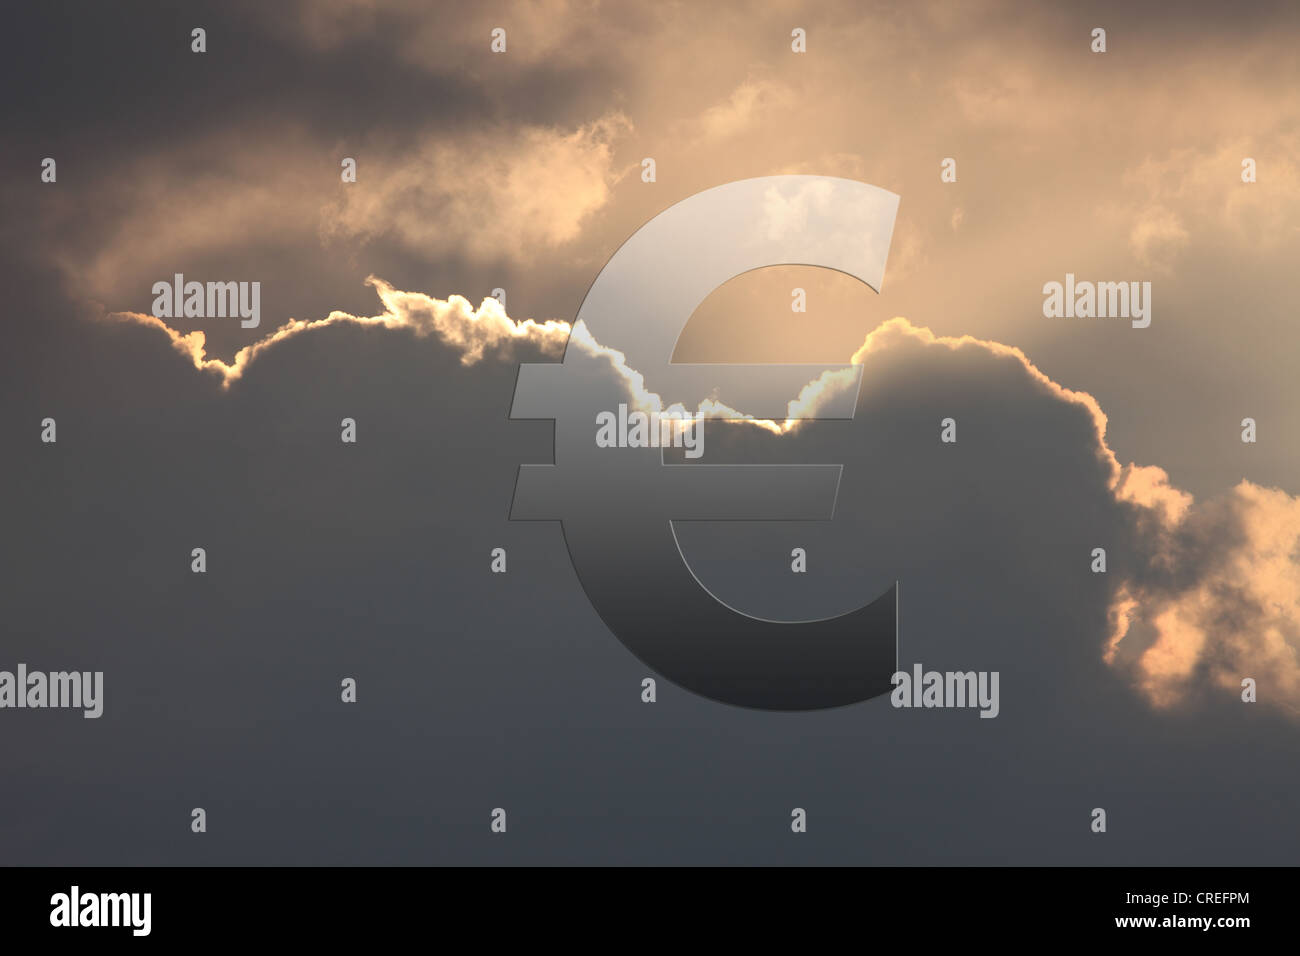 Euro Symbol with Storm Clouds Illuminated by the Sun Stock Photo